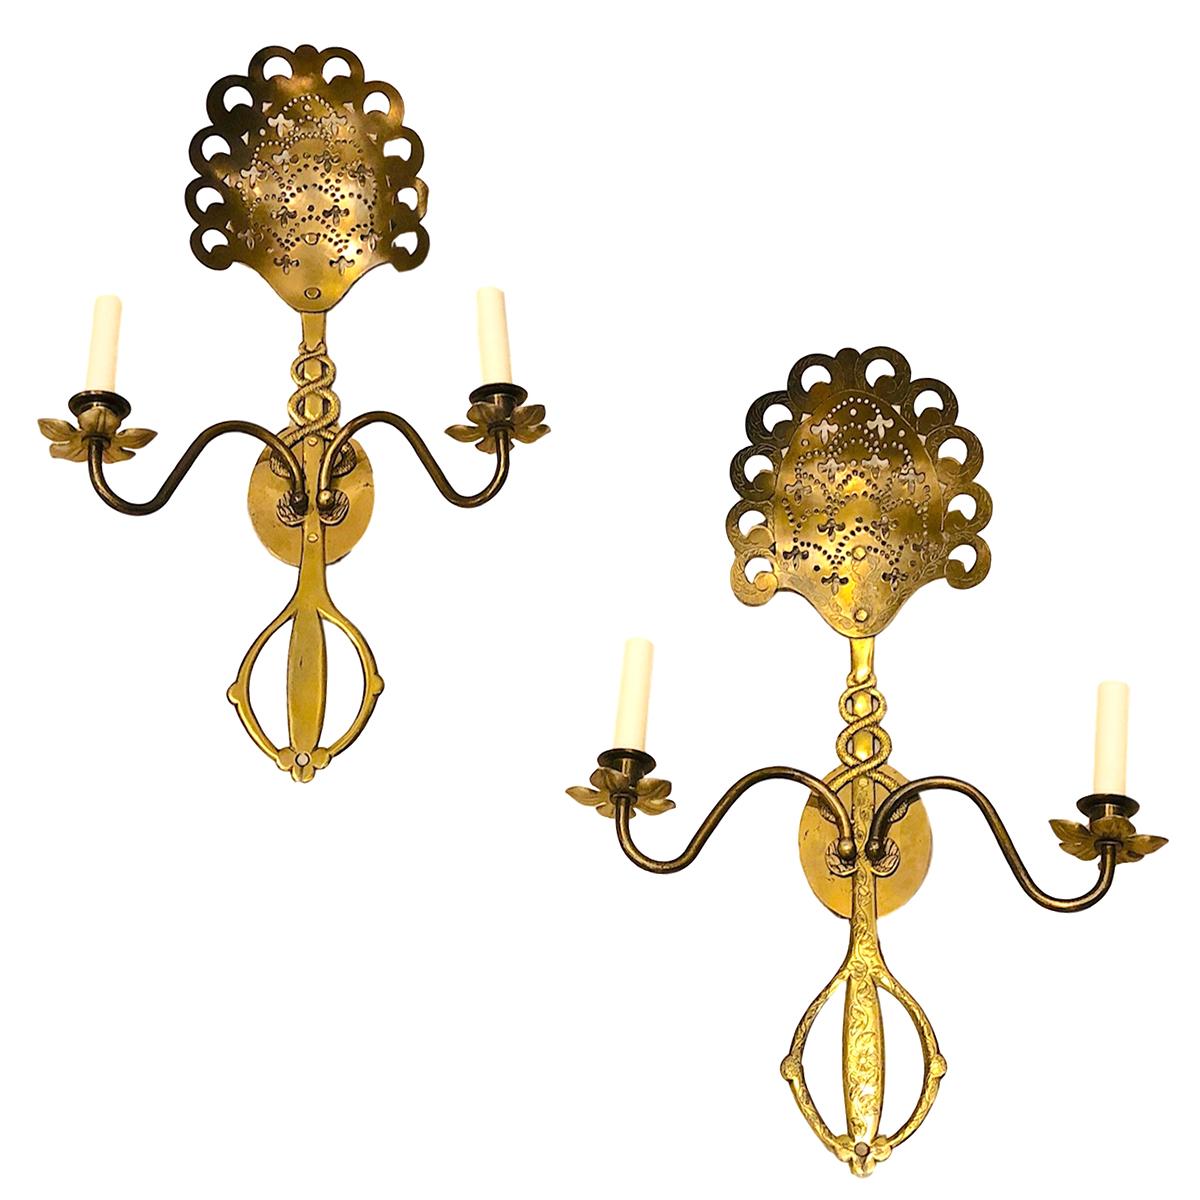 Early 20th Century Pair of Middle Eastern Pierced Sconces For Sale